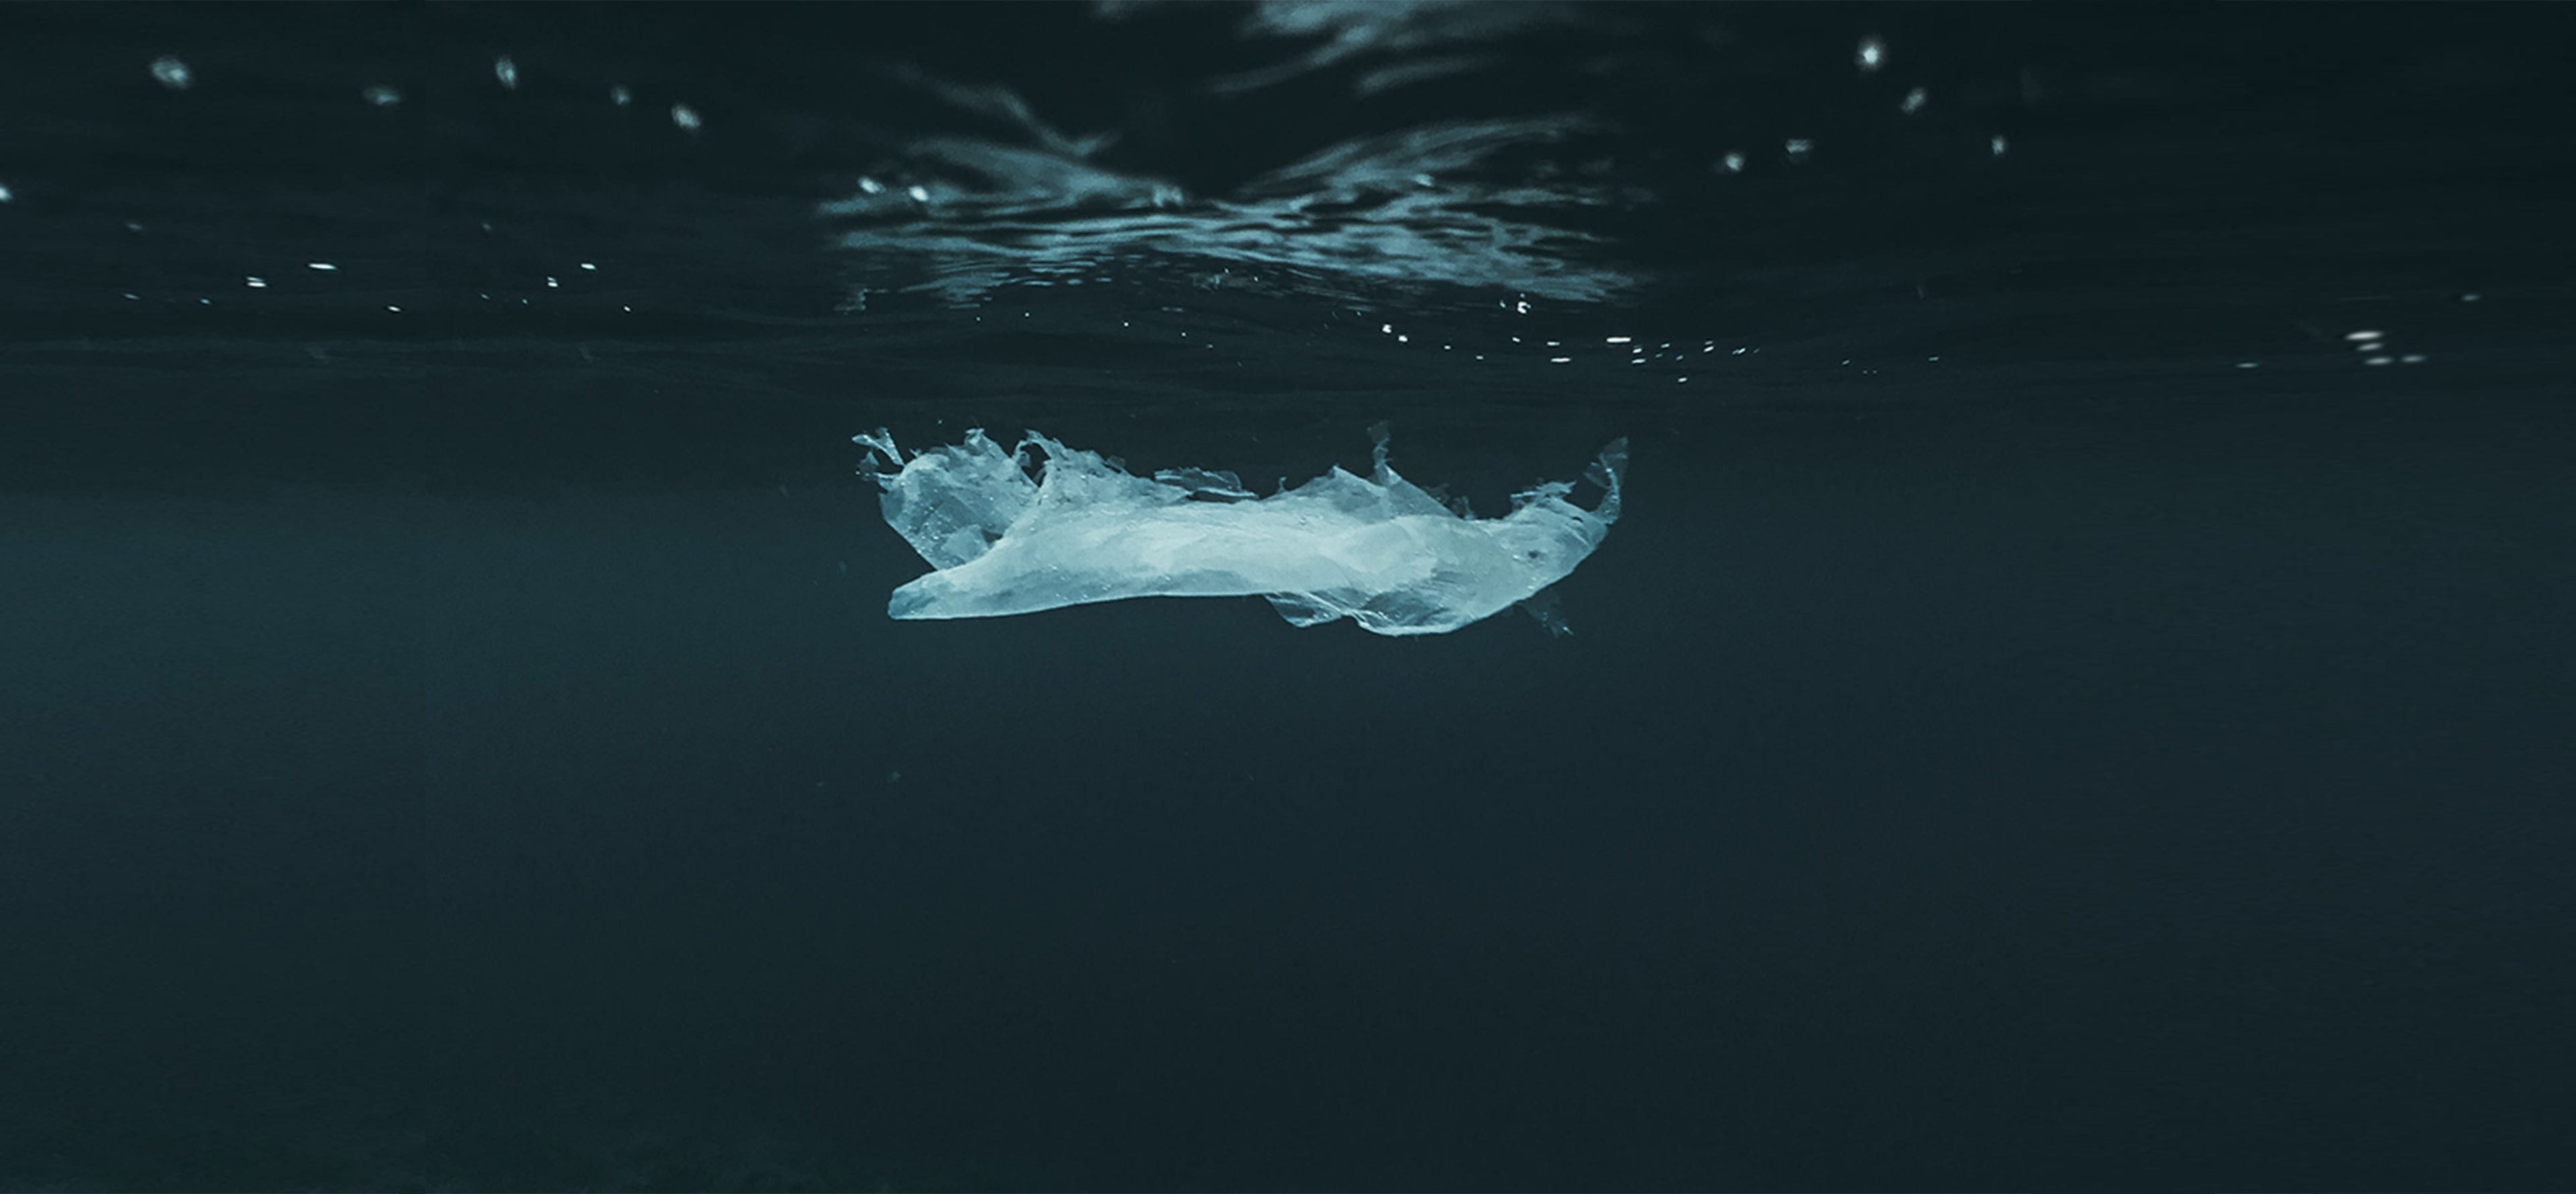 a photograph showing a plastic bag floating in the sea